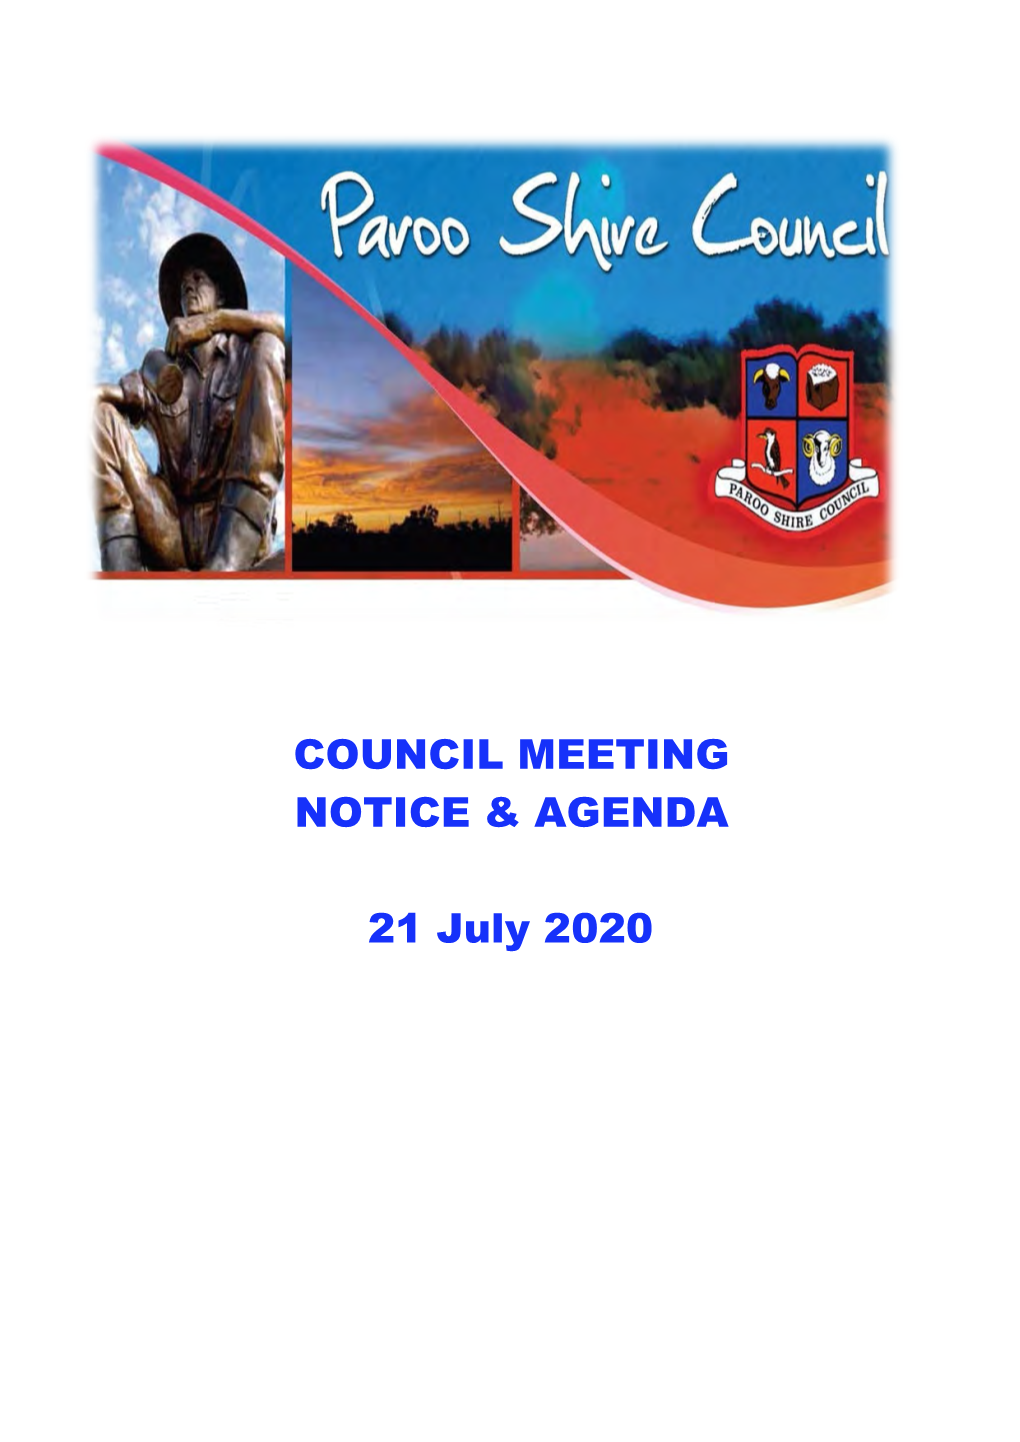 COUNCIL MEETING NOTICE & AGENDA 21 July 2020